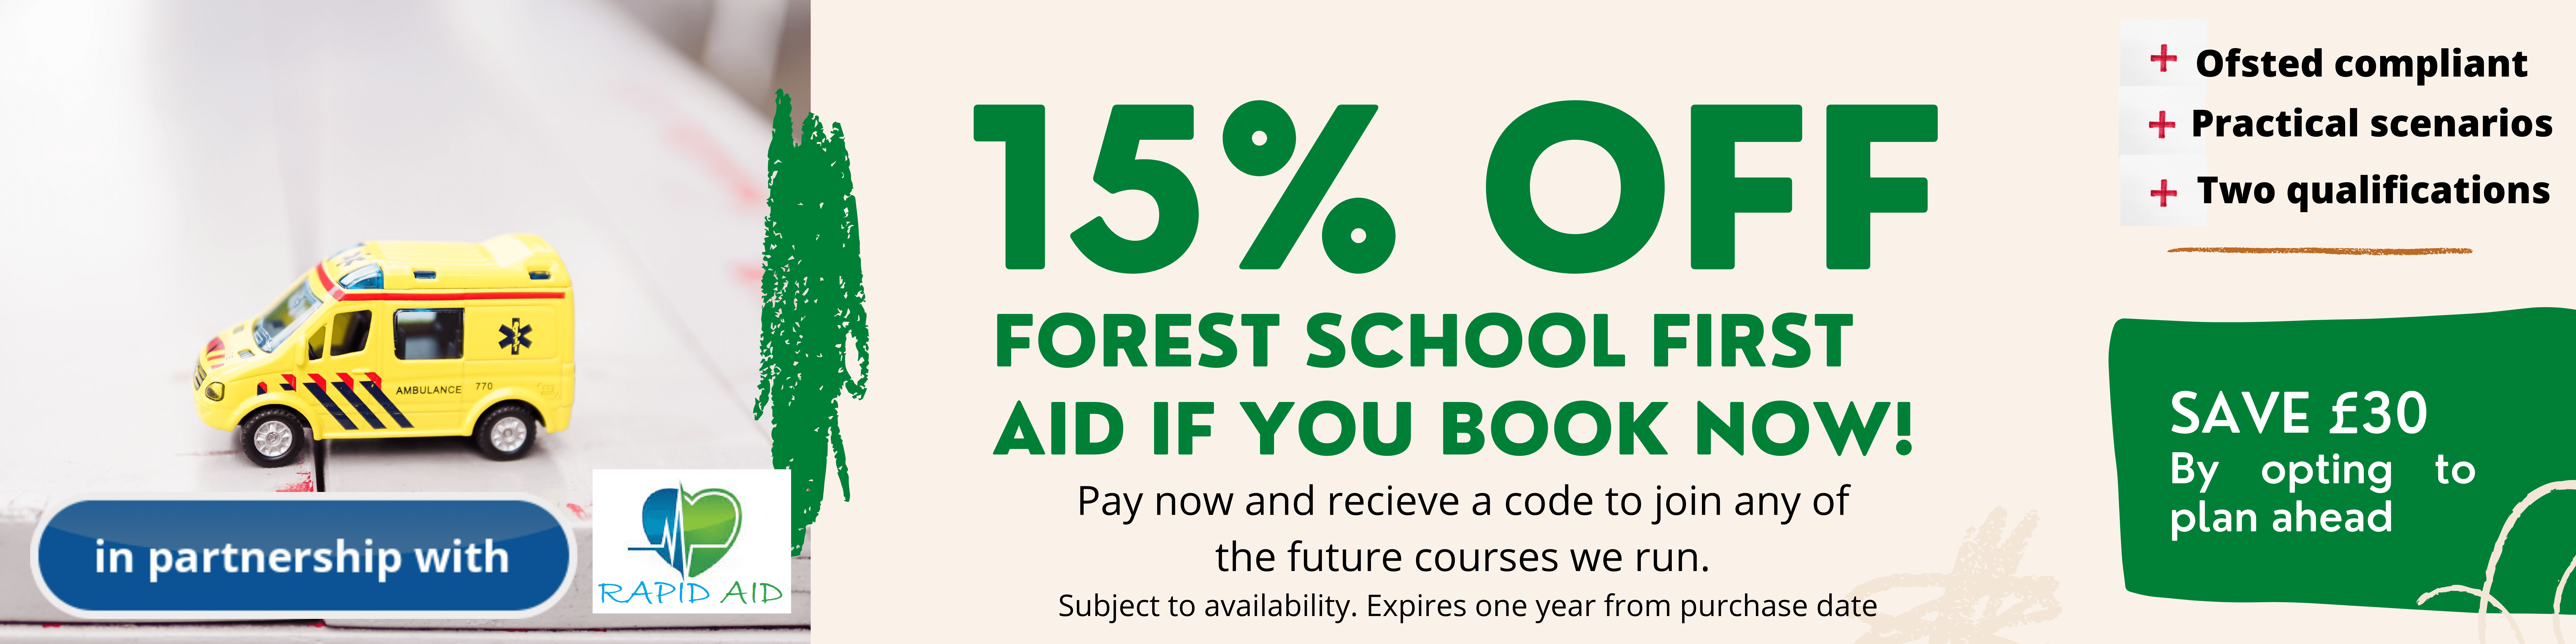 FirstAid_discount Forest School Leader Training - February 2022